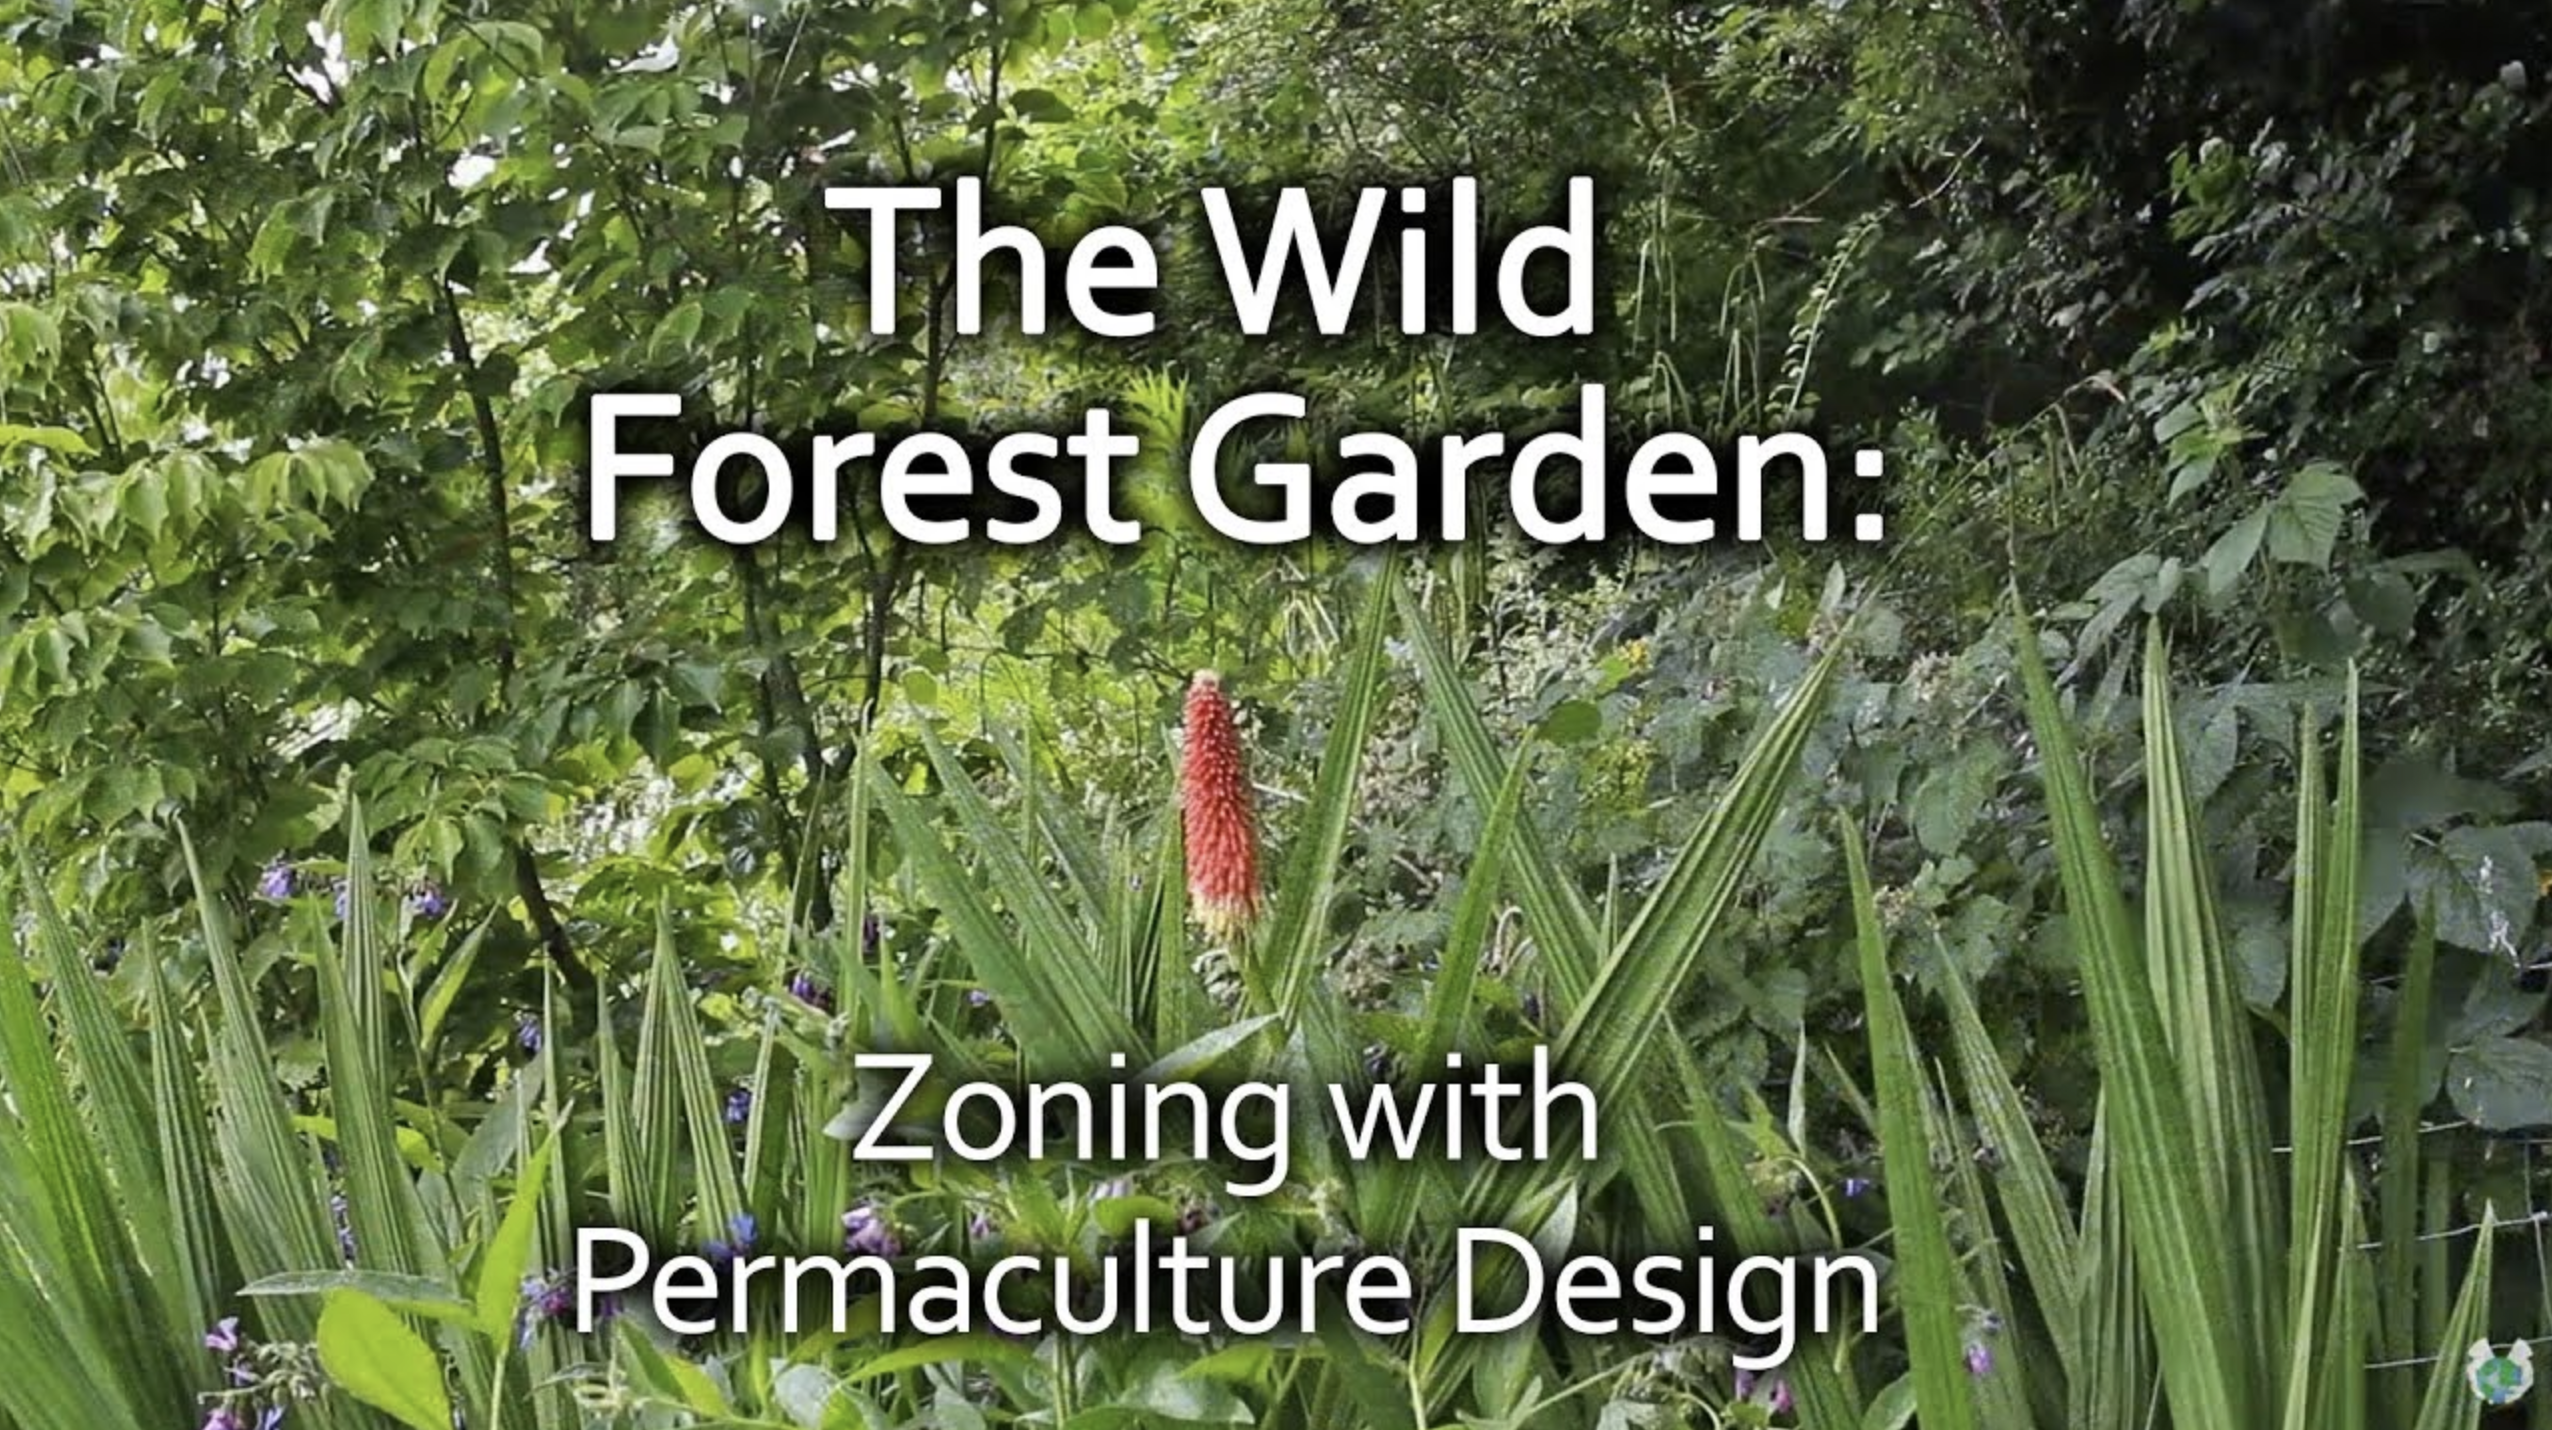 The Wild Forest Garden: Zoning with Permaculture Design